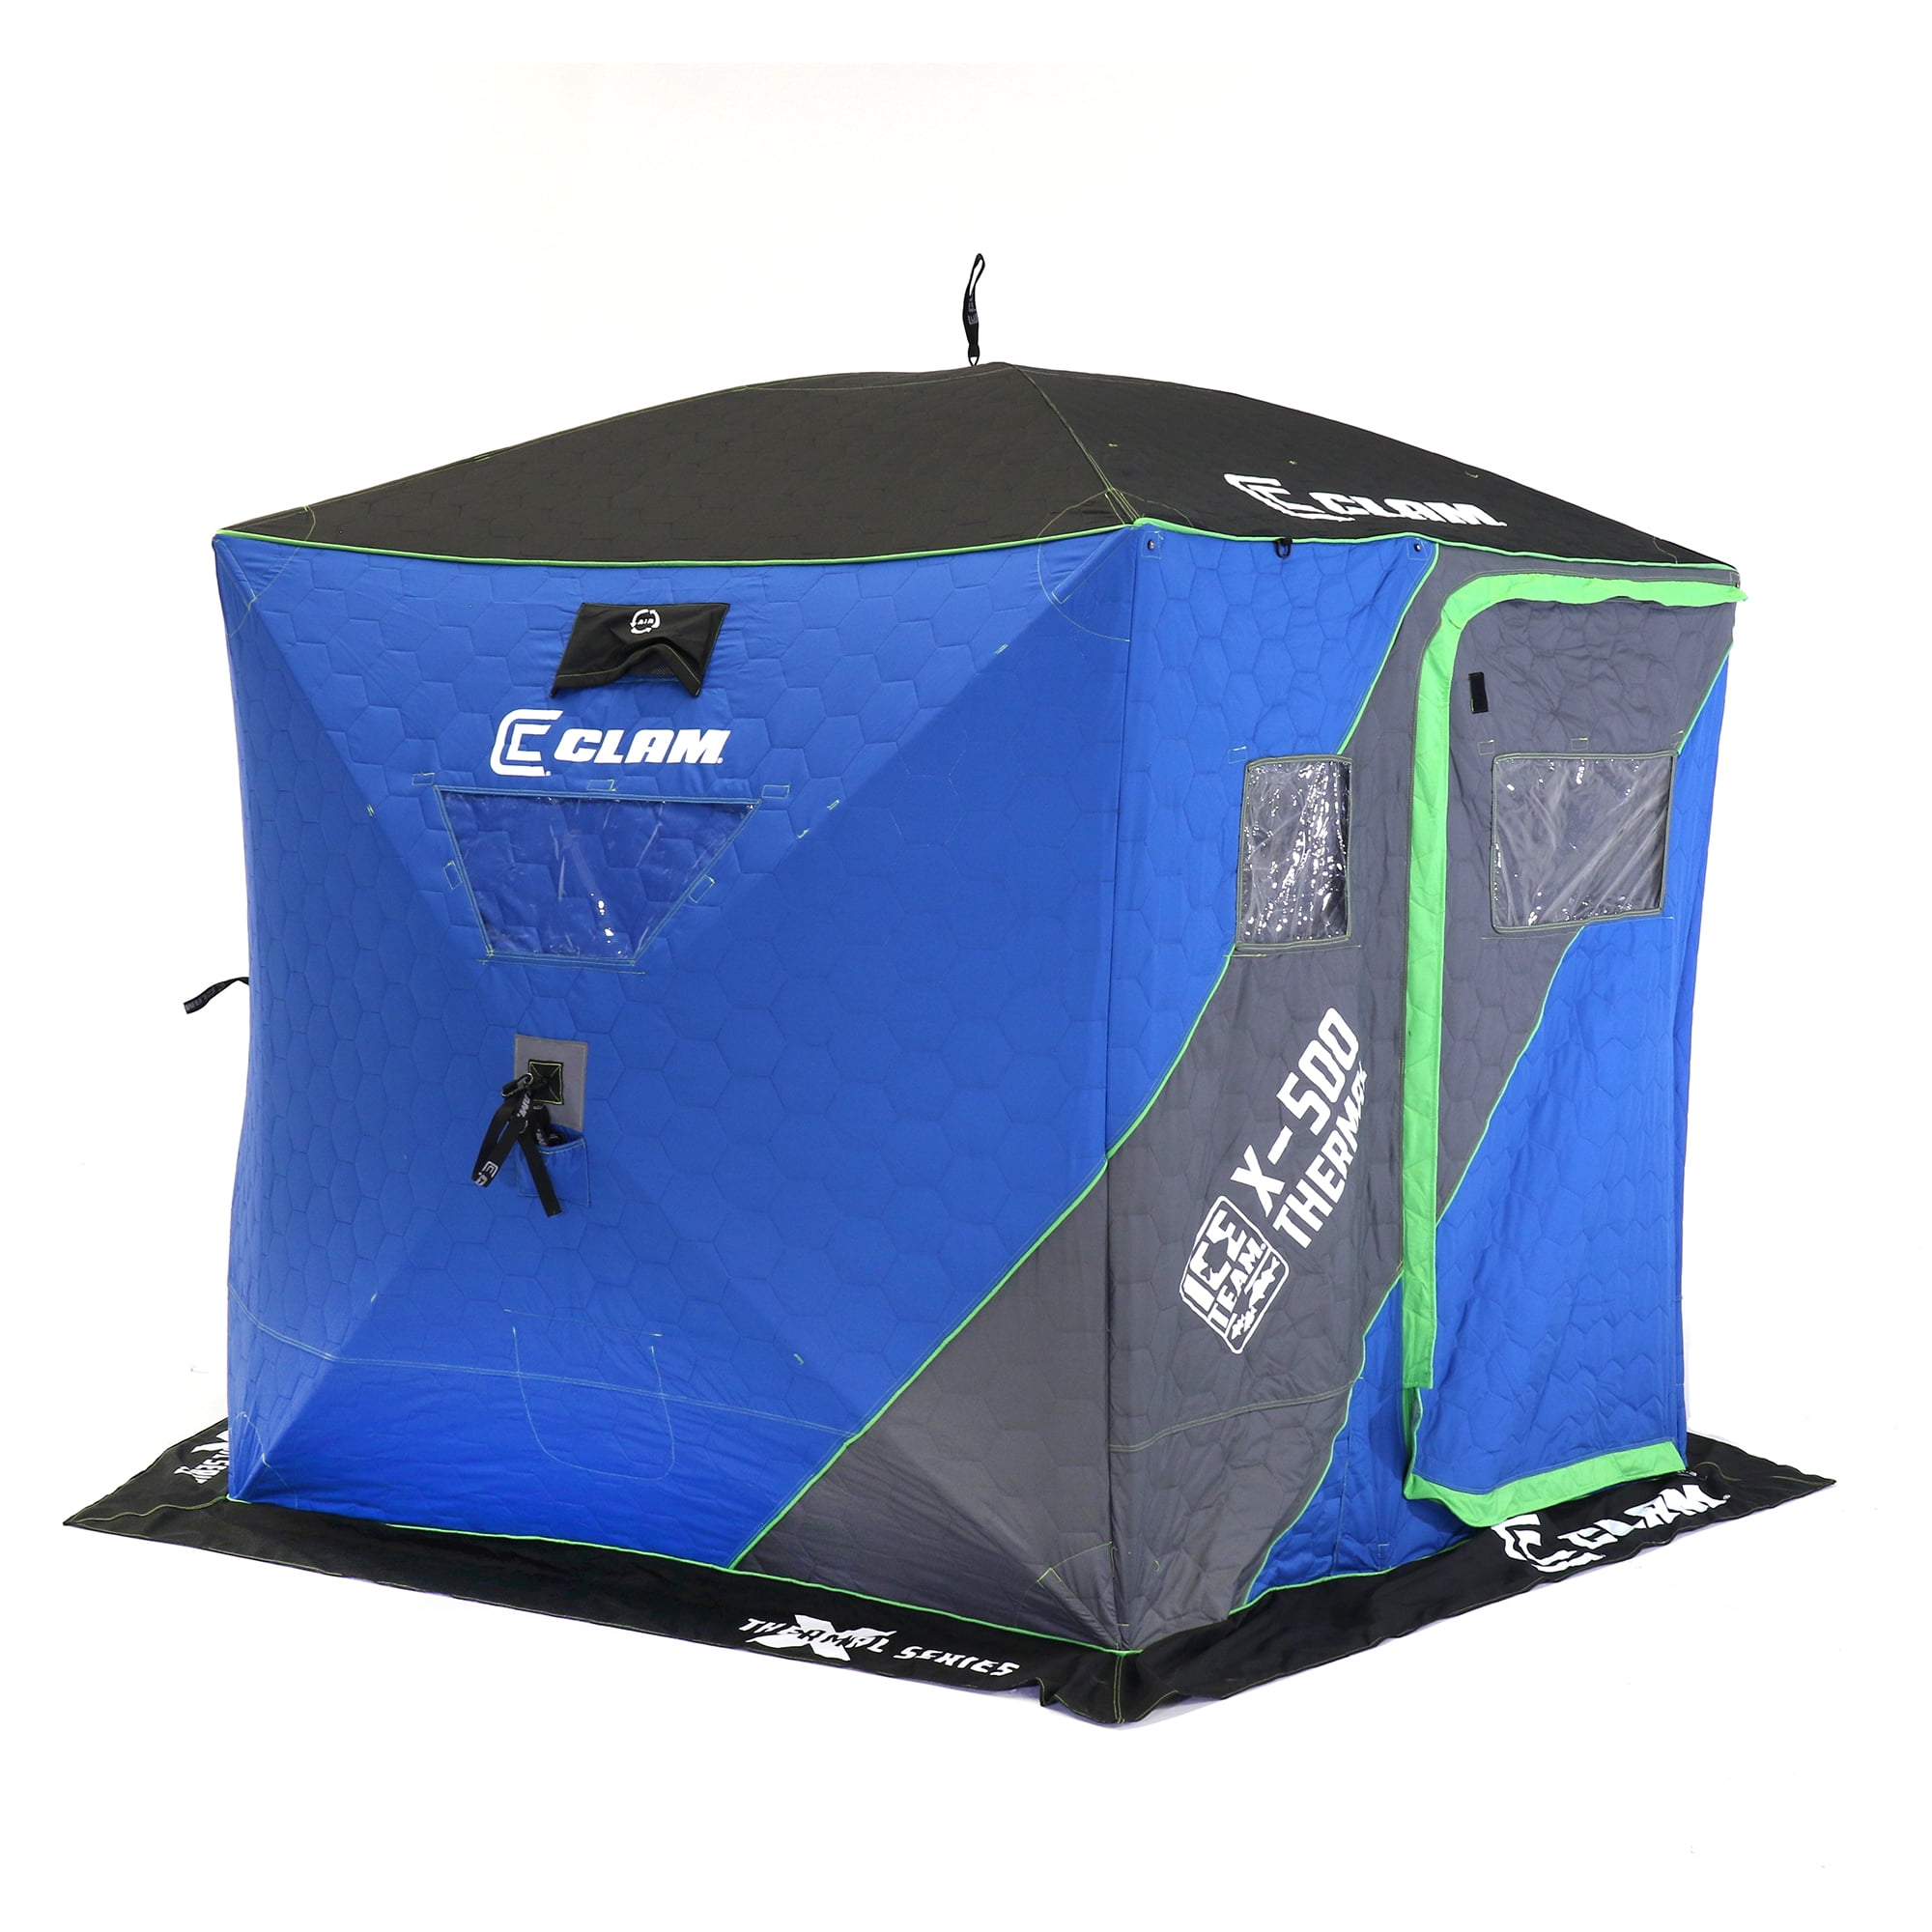 CLAM C-890 Portable 11.5 Ft 6 Person Pop Up Ice Fishing Thermal Hub Shelter  Tent, 1 Piece - Harris Teeter